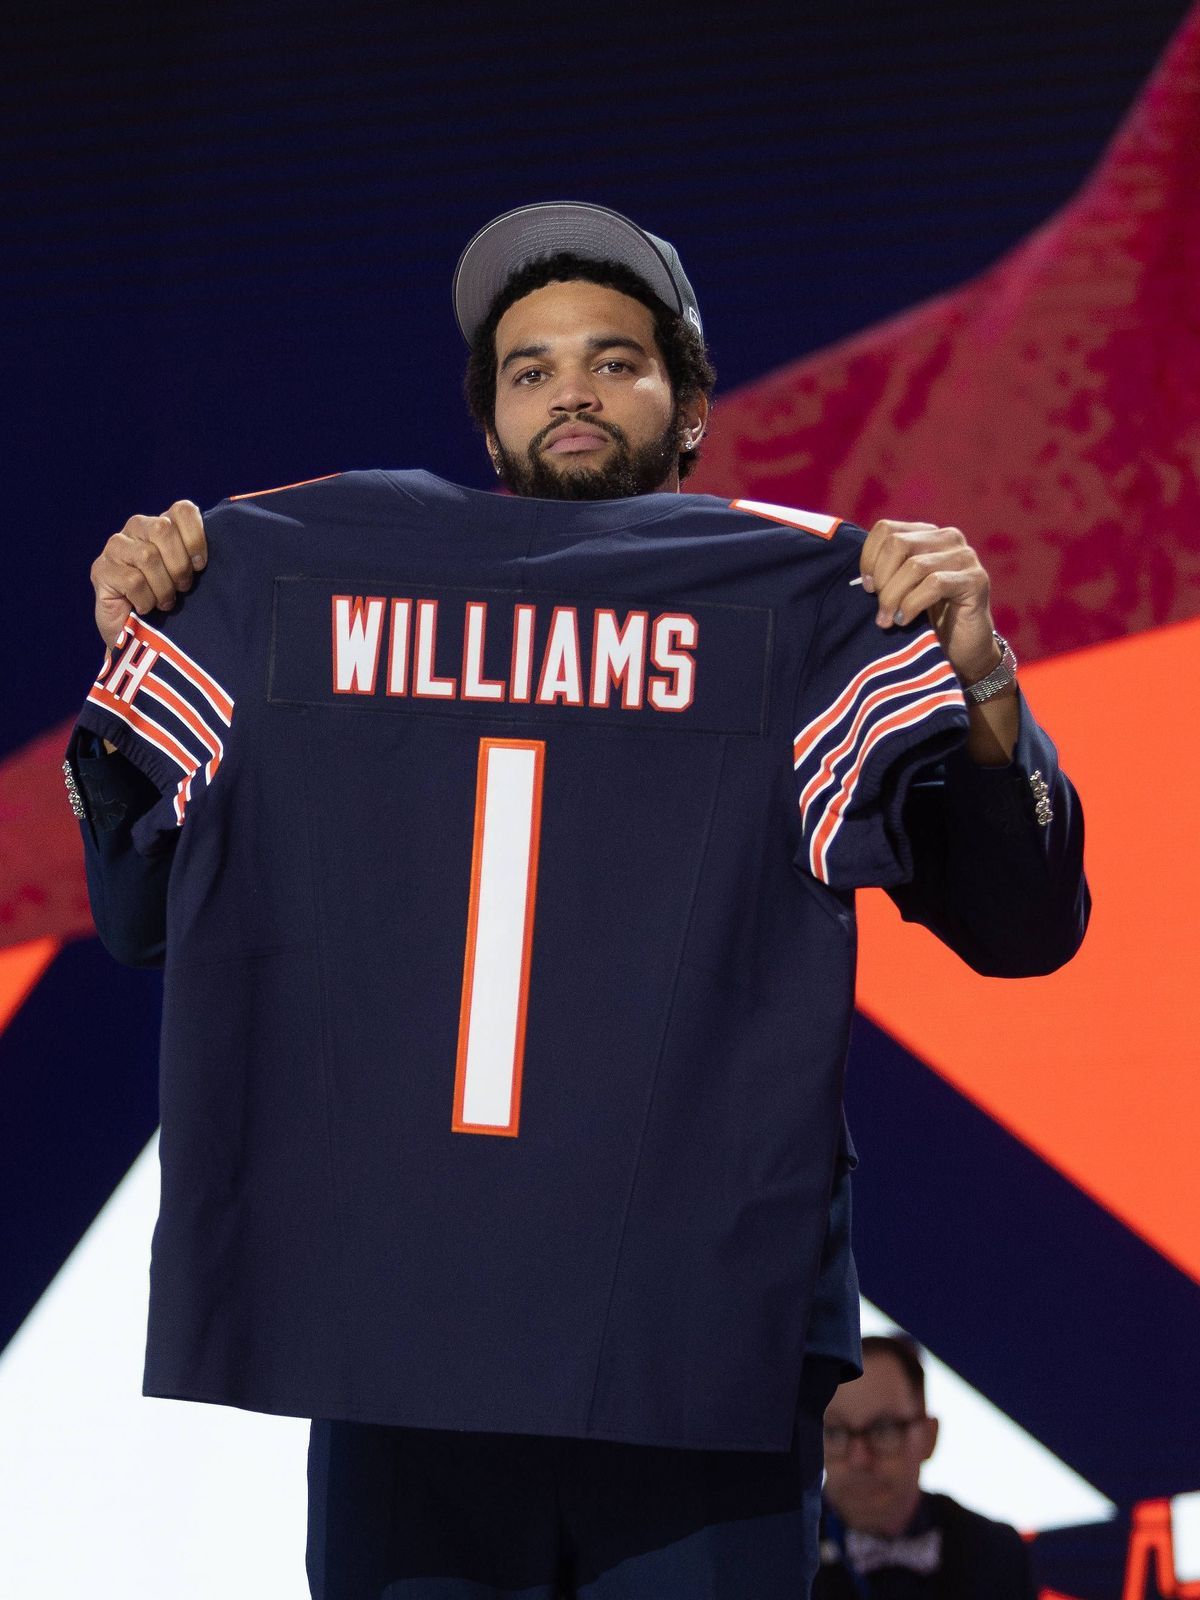 DETROIT, MI - APRIL 25: USC Quarterback Caleb Williams poses with his jersey after being taken first overall by the Chicago Bears during day 1 of the NFL, American Football Herren, USA Draft on Apr...